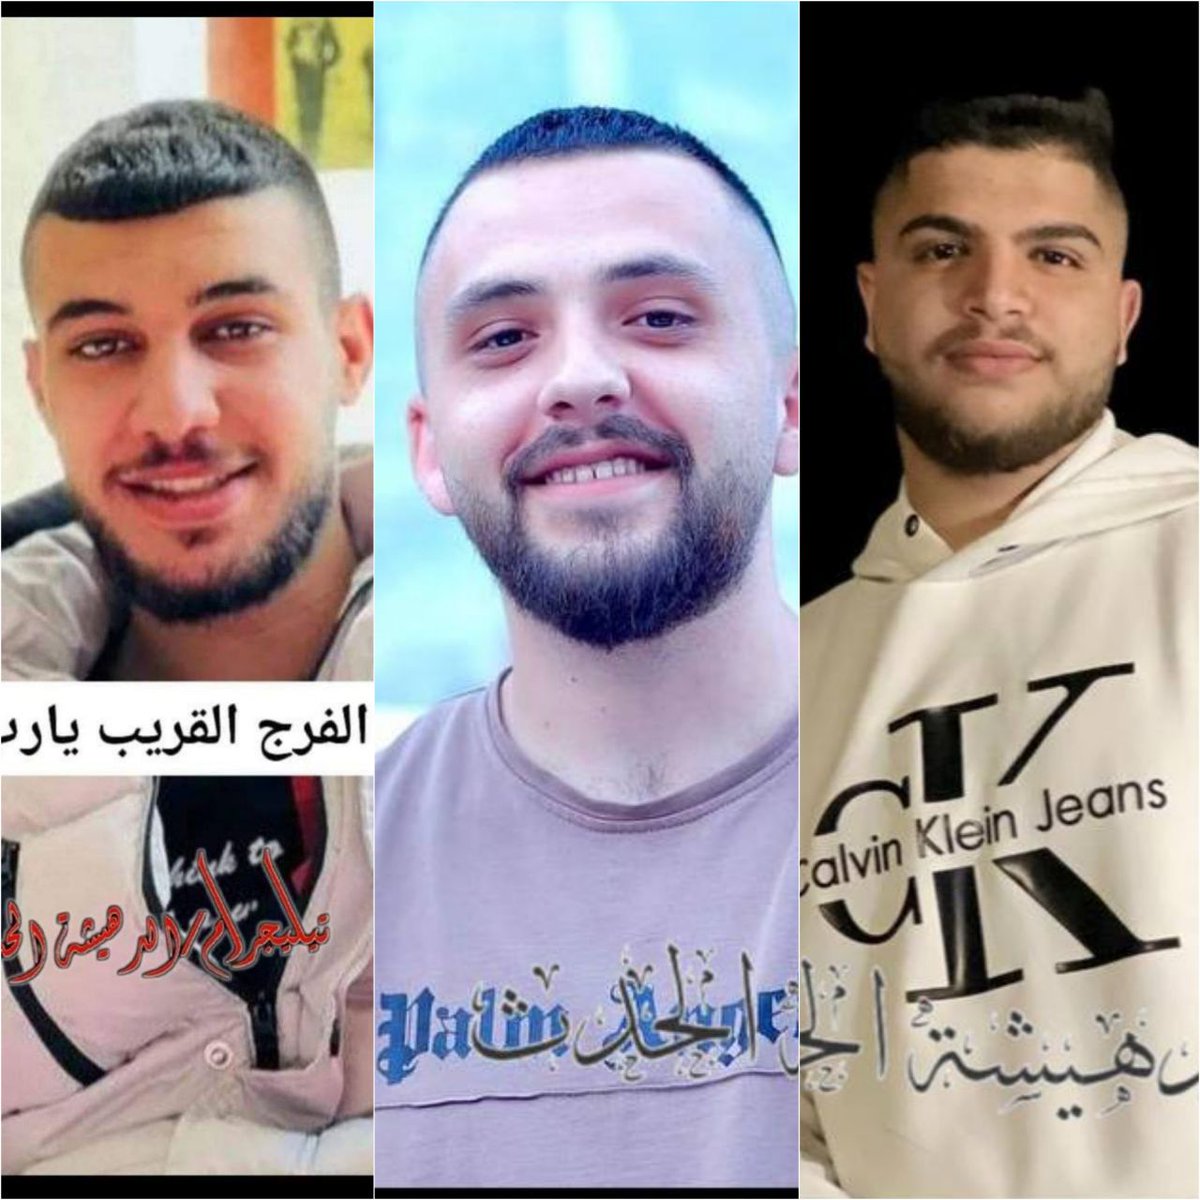 ⭕ Zionist occupying forces kidnapped young men Ibrahim Al-Wahadneh, Ali Al-Saraawi and Marsel Abadi after storming their homes in the Dheisha camp in Bethlehem. #WestBank